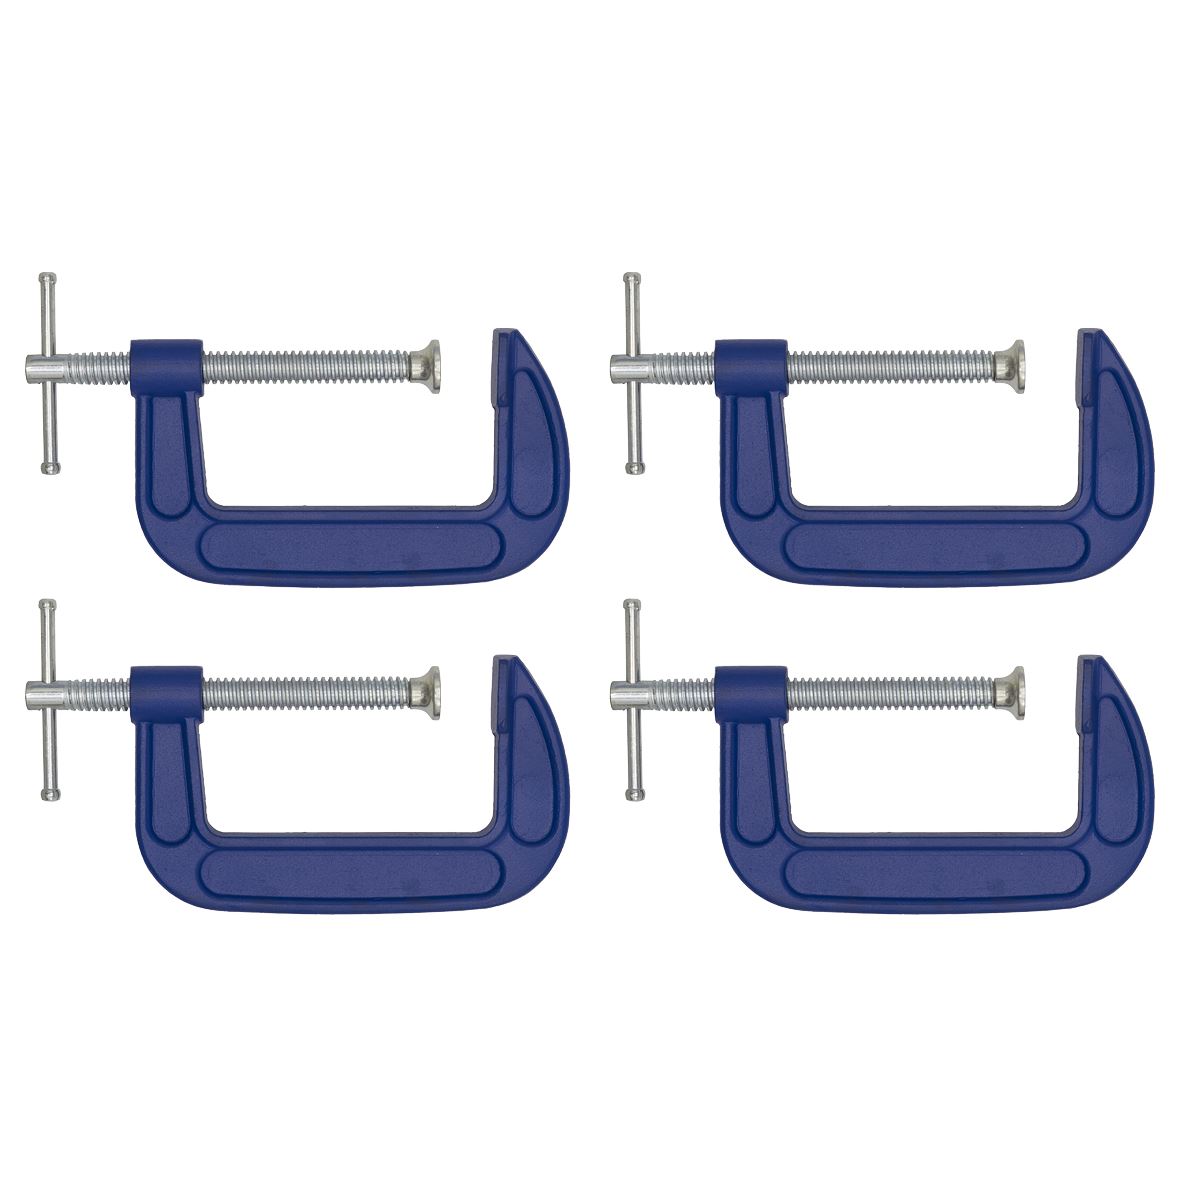 Sealey G-Clamp 100mm - Pack of 4